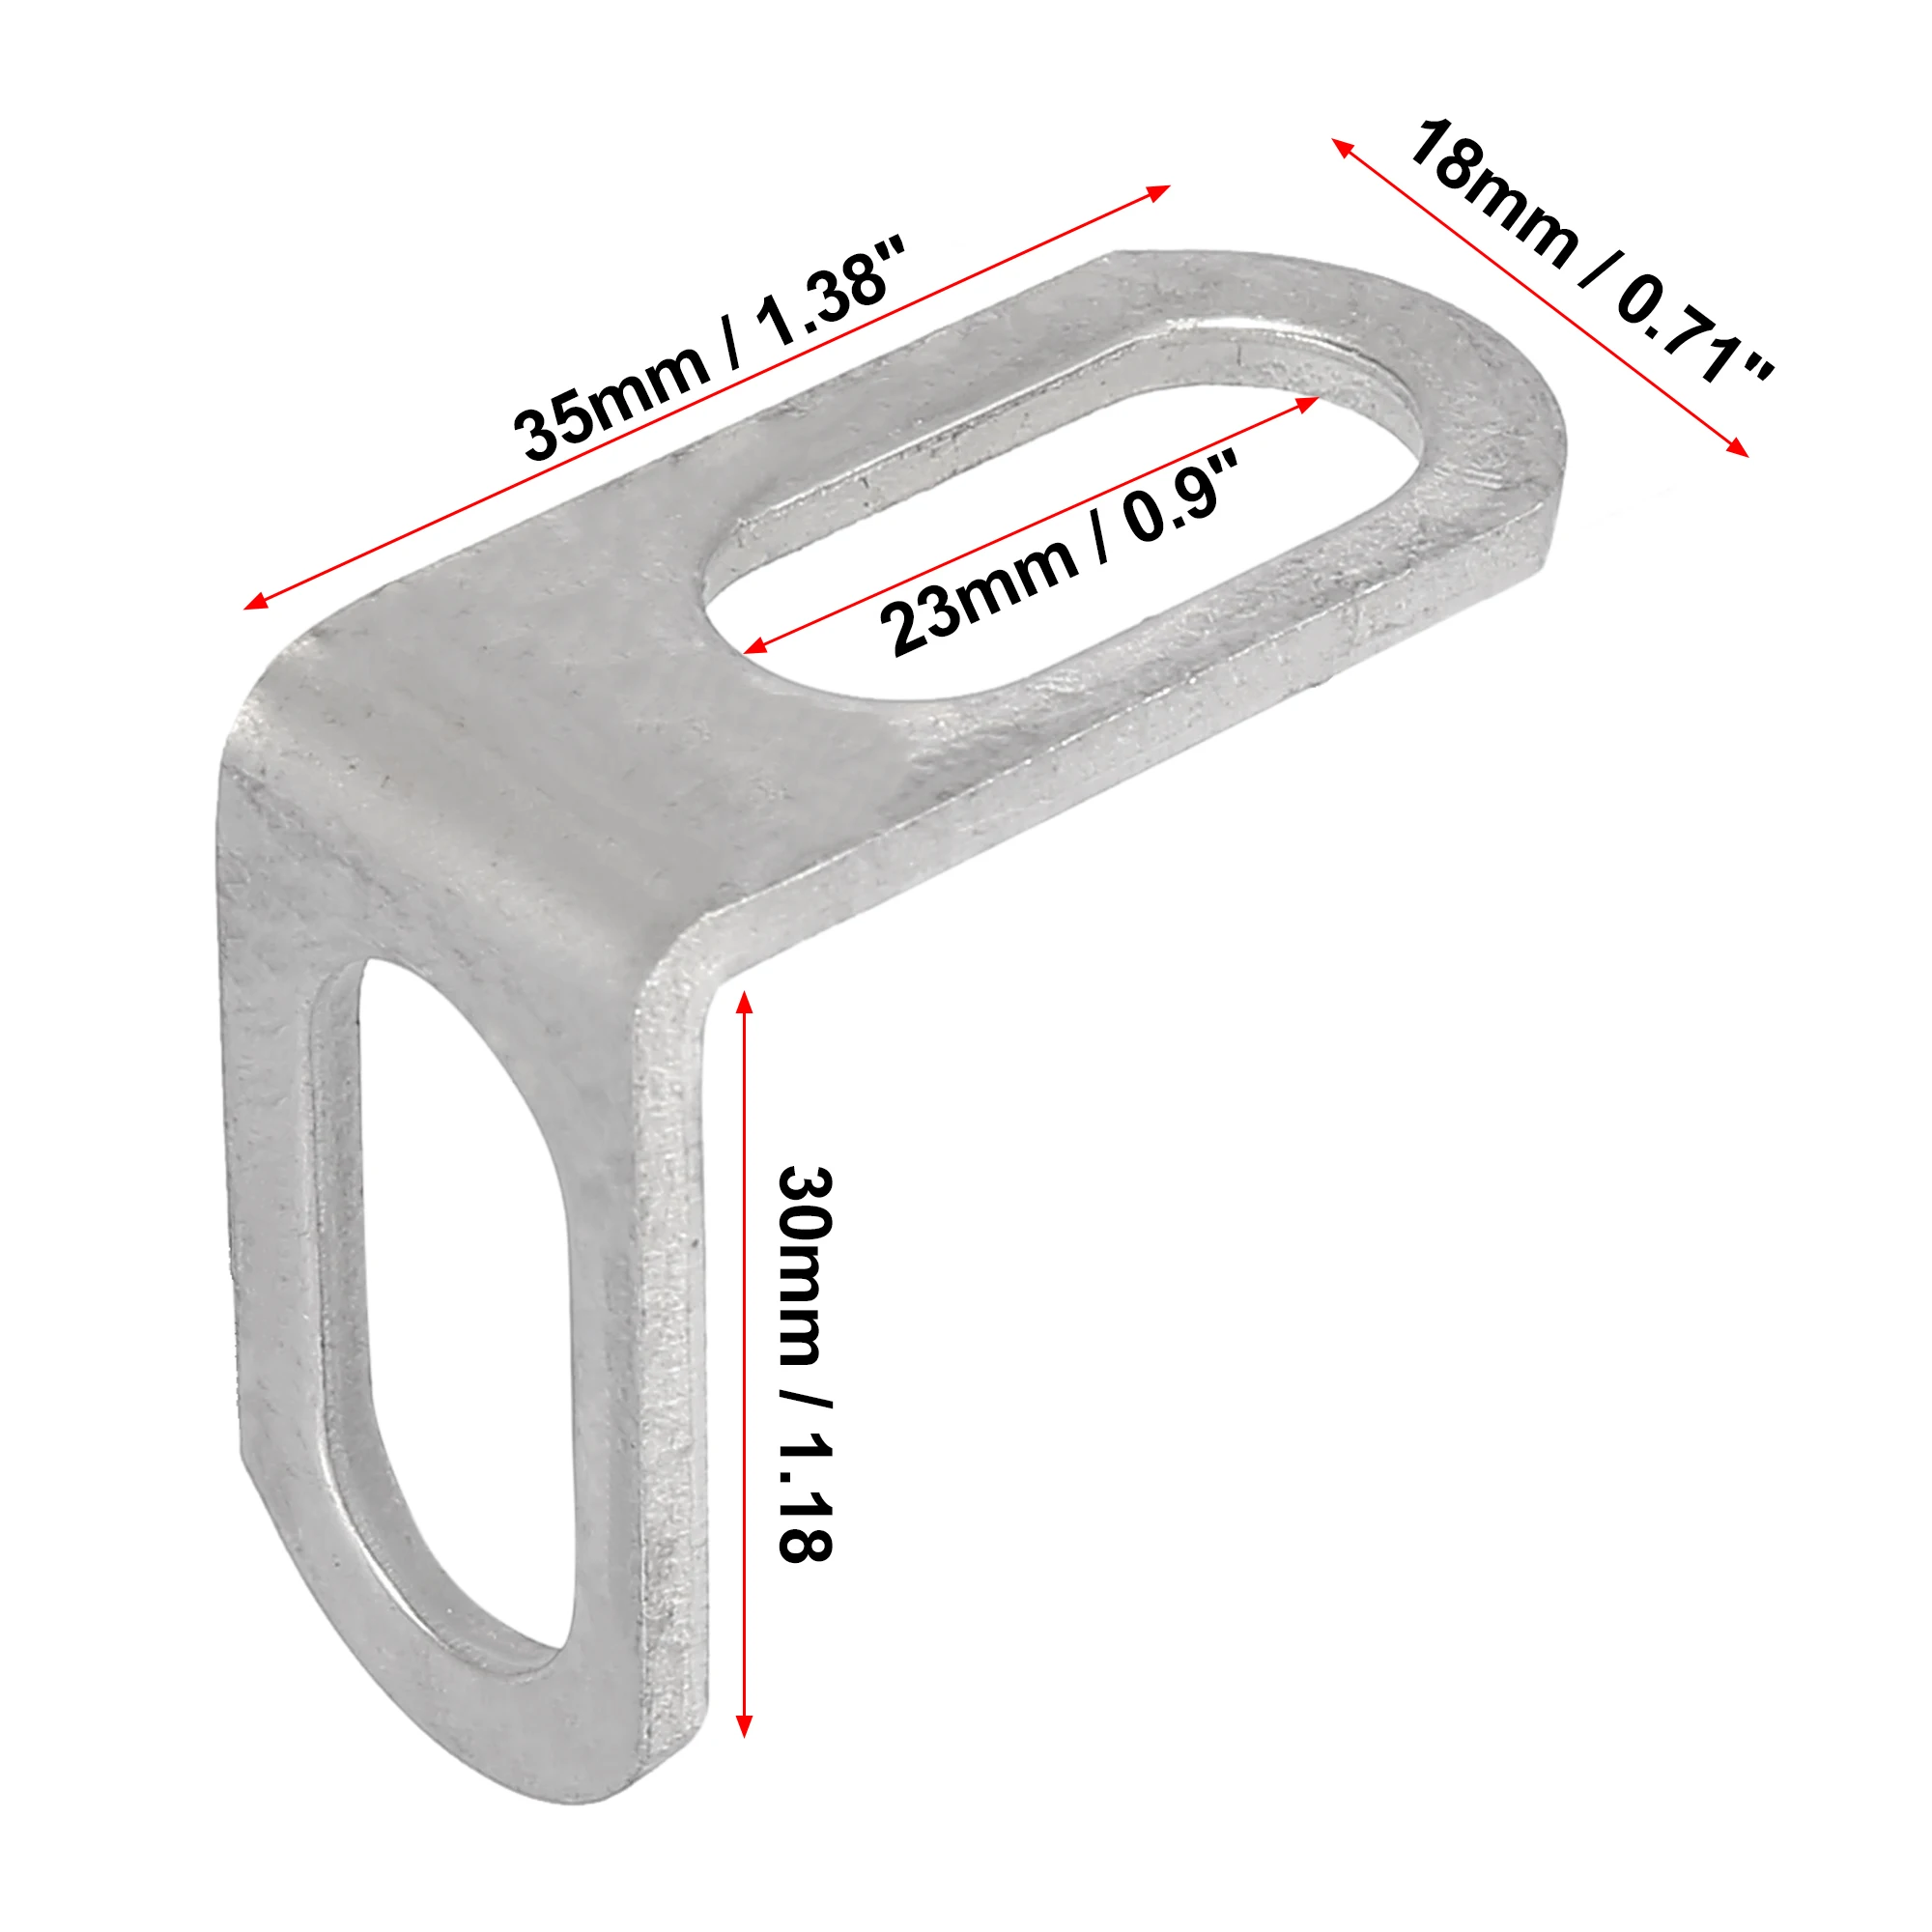 Motoforti 20mm 0.8 Motorcycle Exhaust Pipe Bracket Z Shape Muffler Mounting Clamp Stainless Steel Silver Tone 